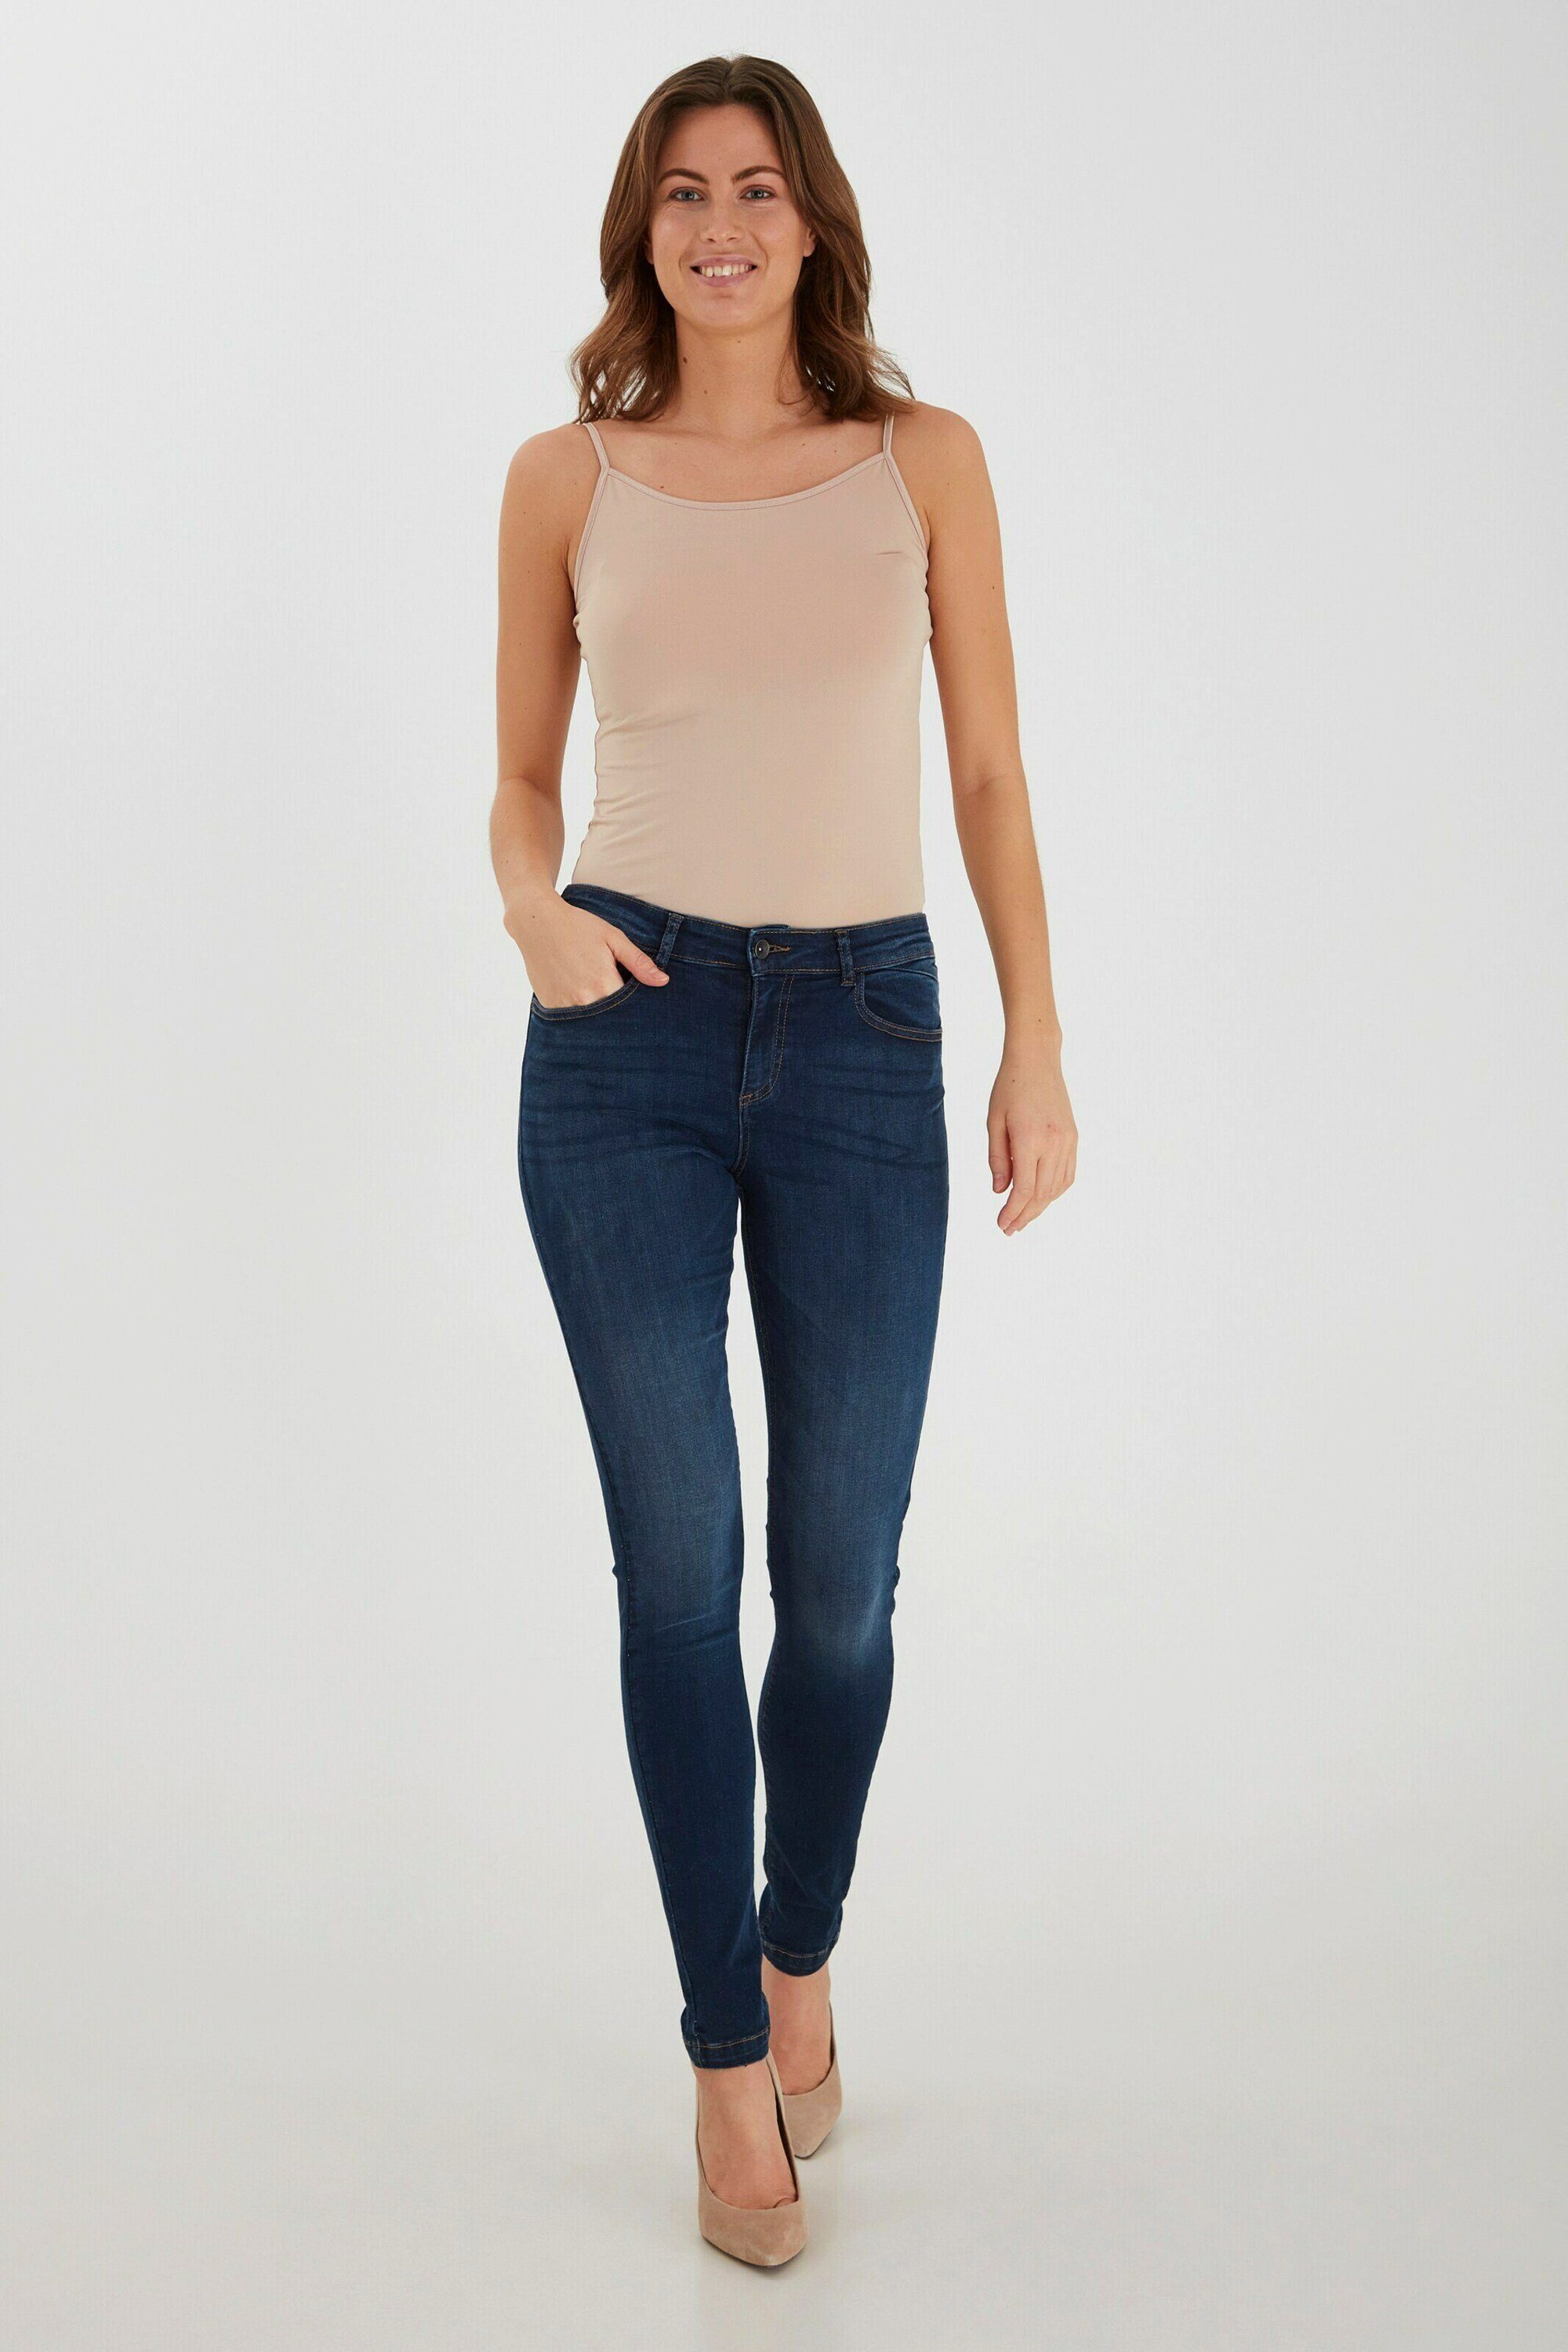 Details (1-tlg) Plain/ohne Detail, Lola Weiteres Luni b.young Skinny-fit-Jeans